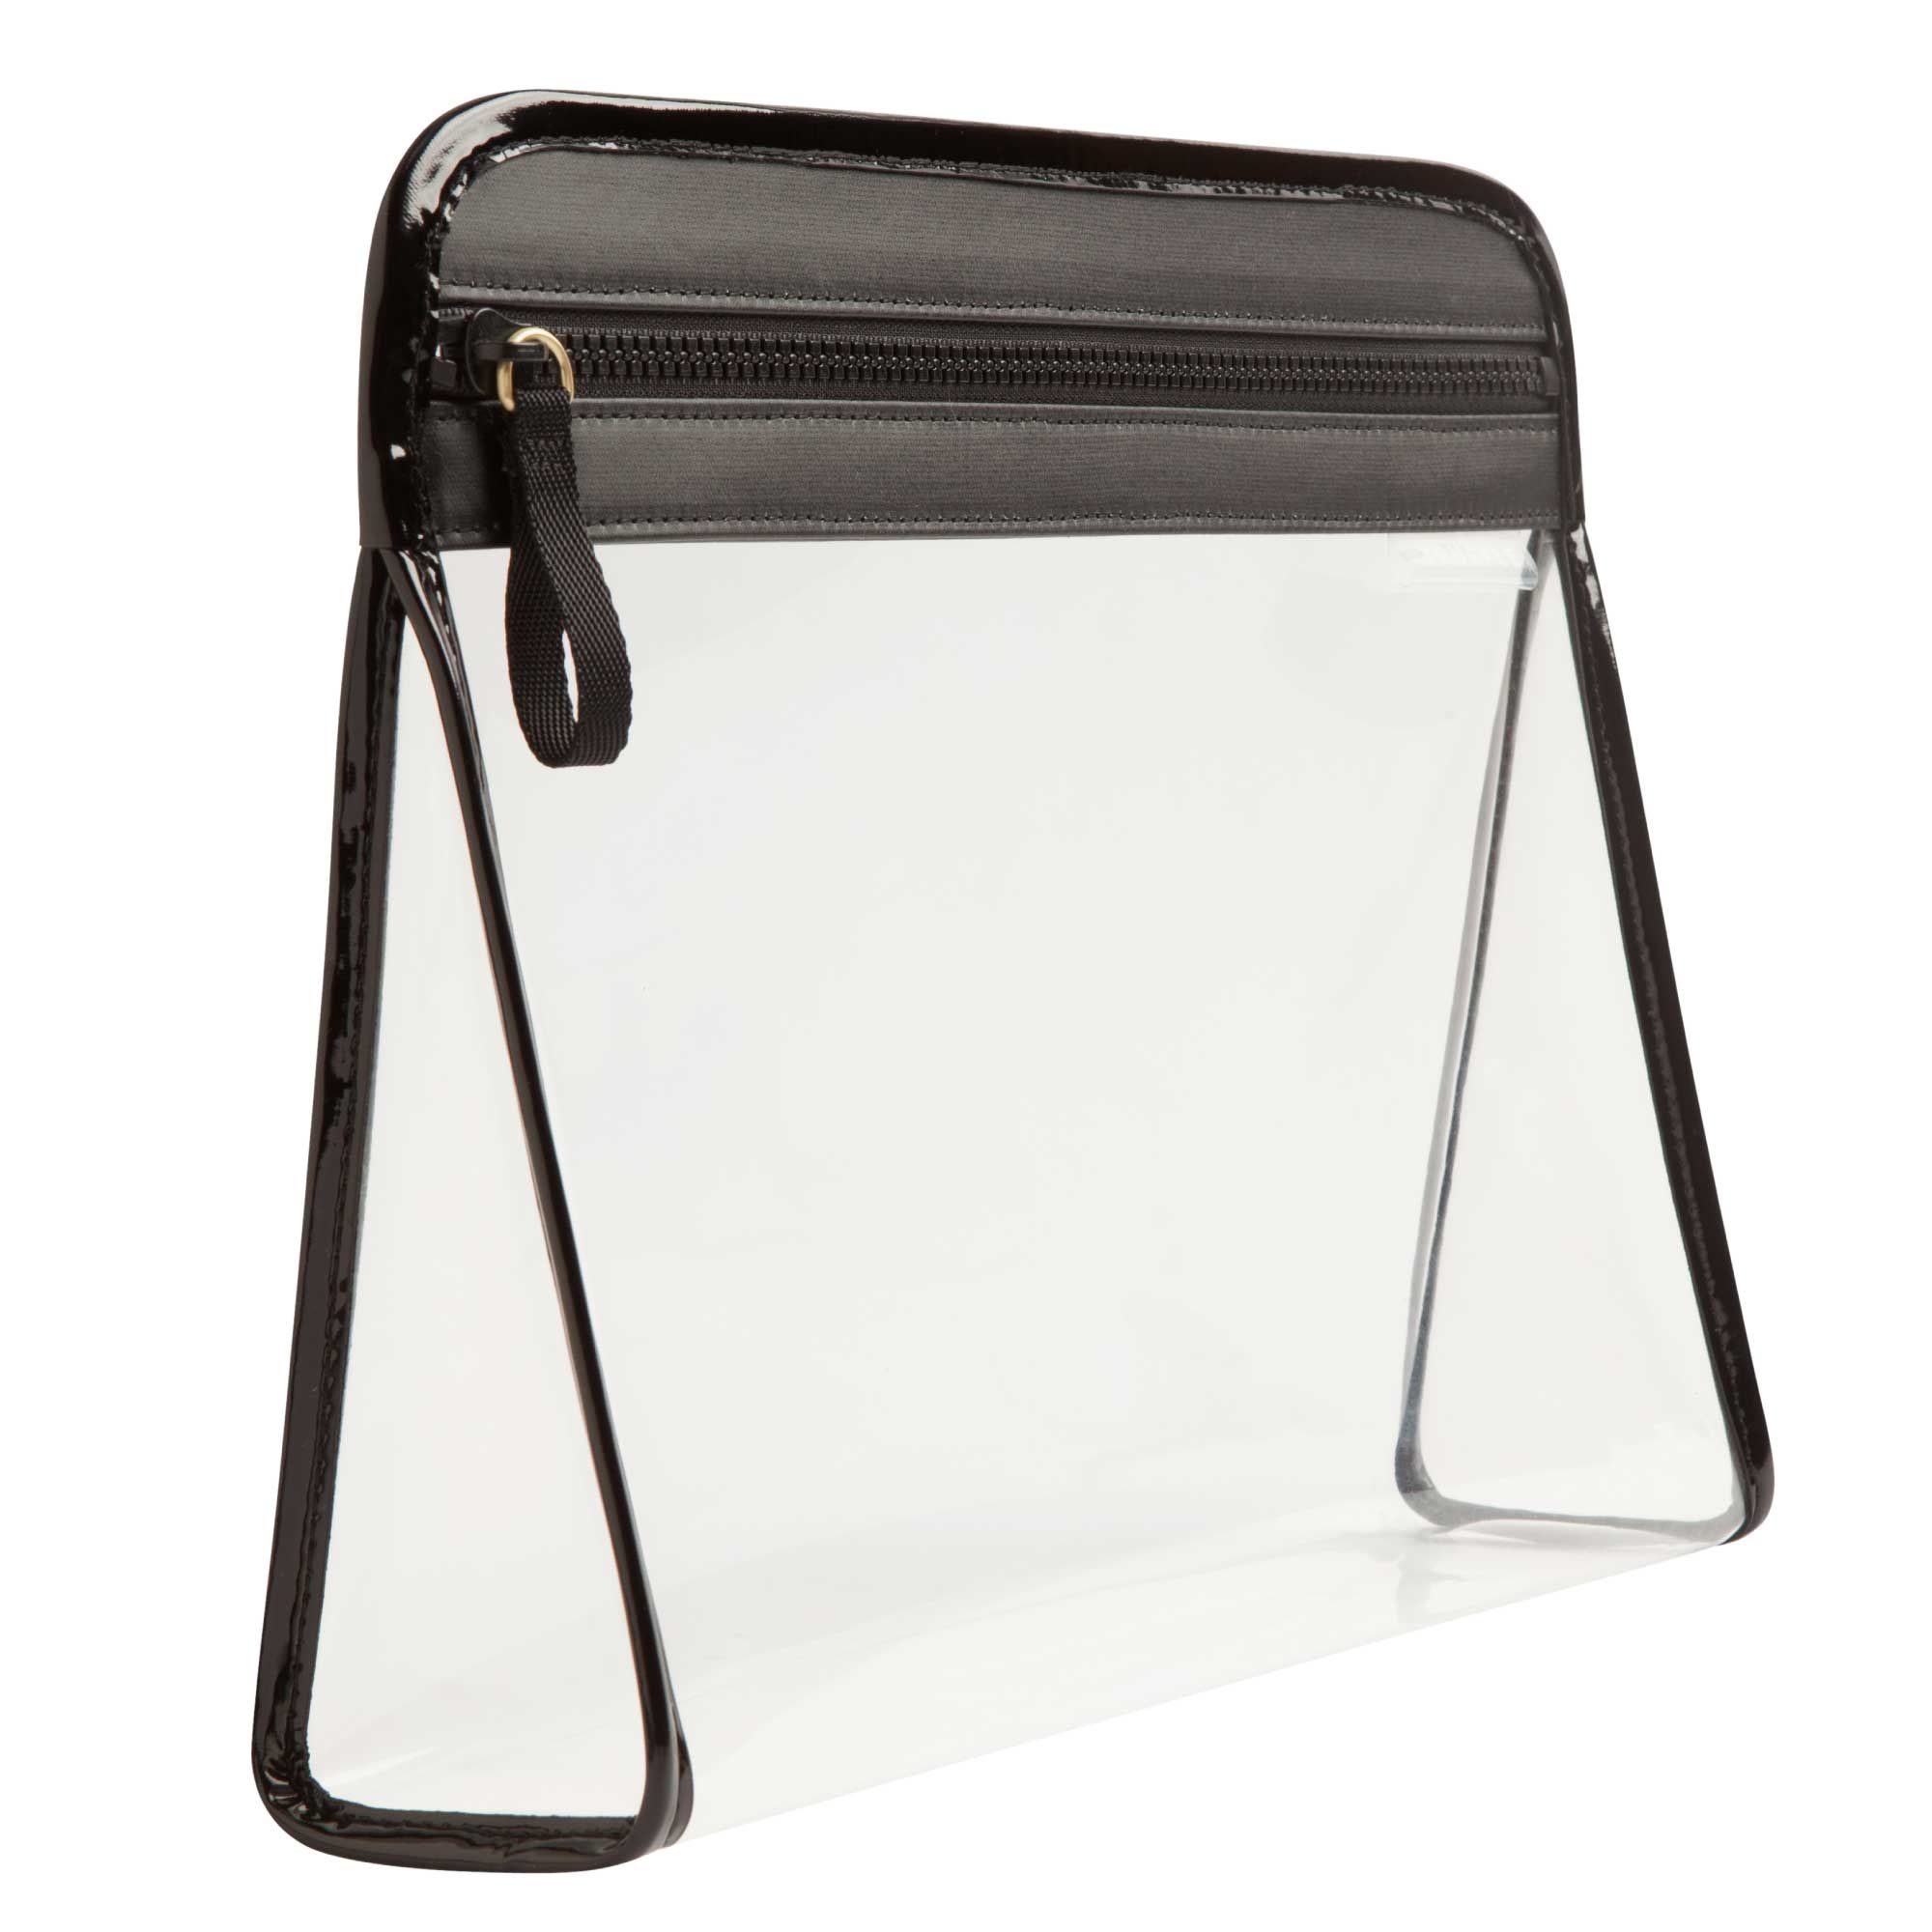 Clarity Pouch Large - Large Clear Travel Pouch | Truffle | TRUFFLE